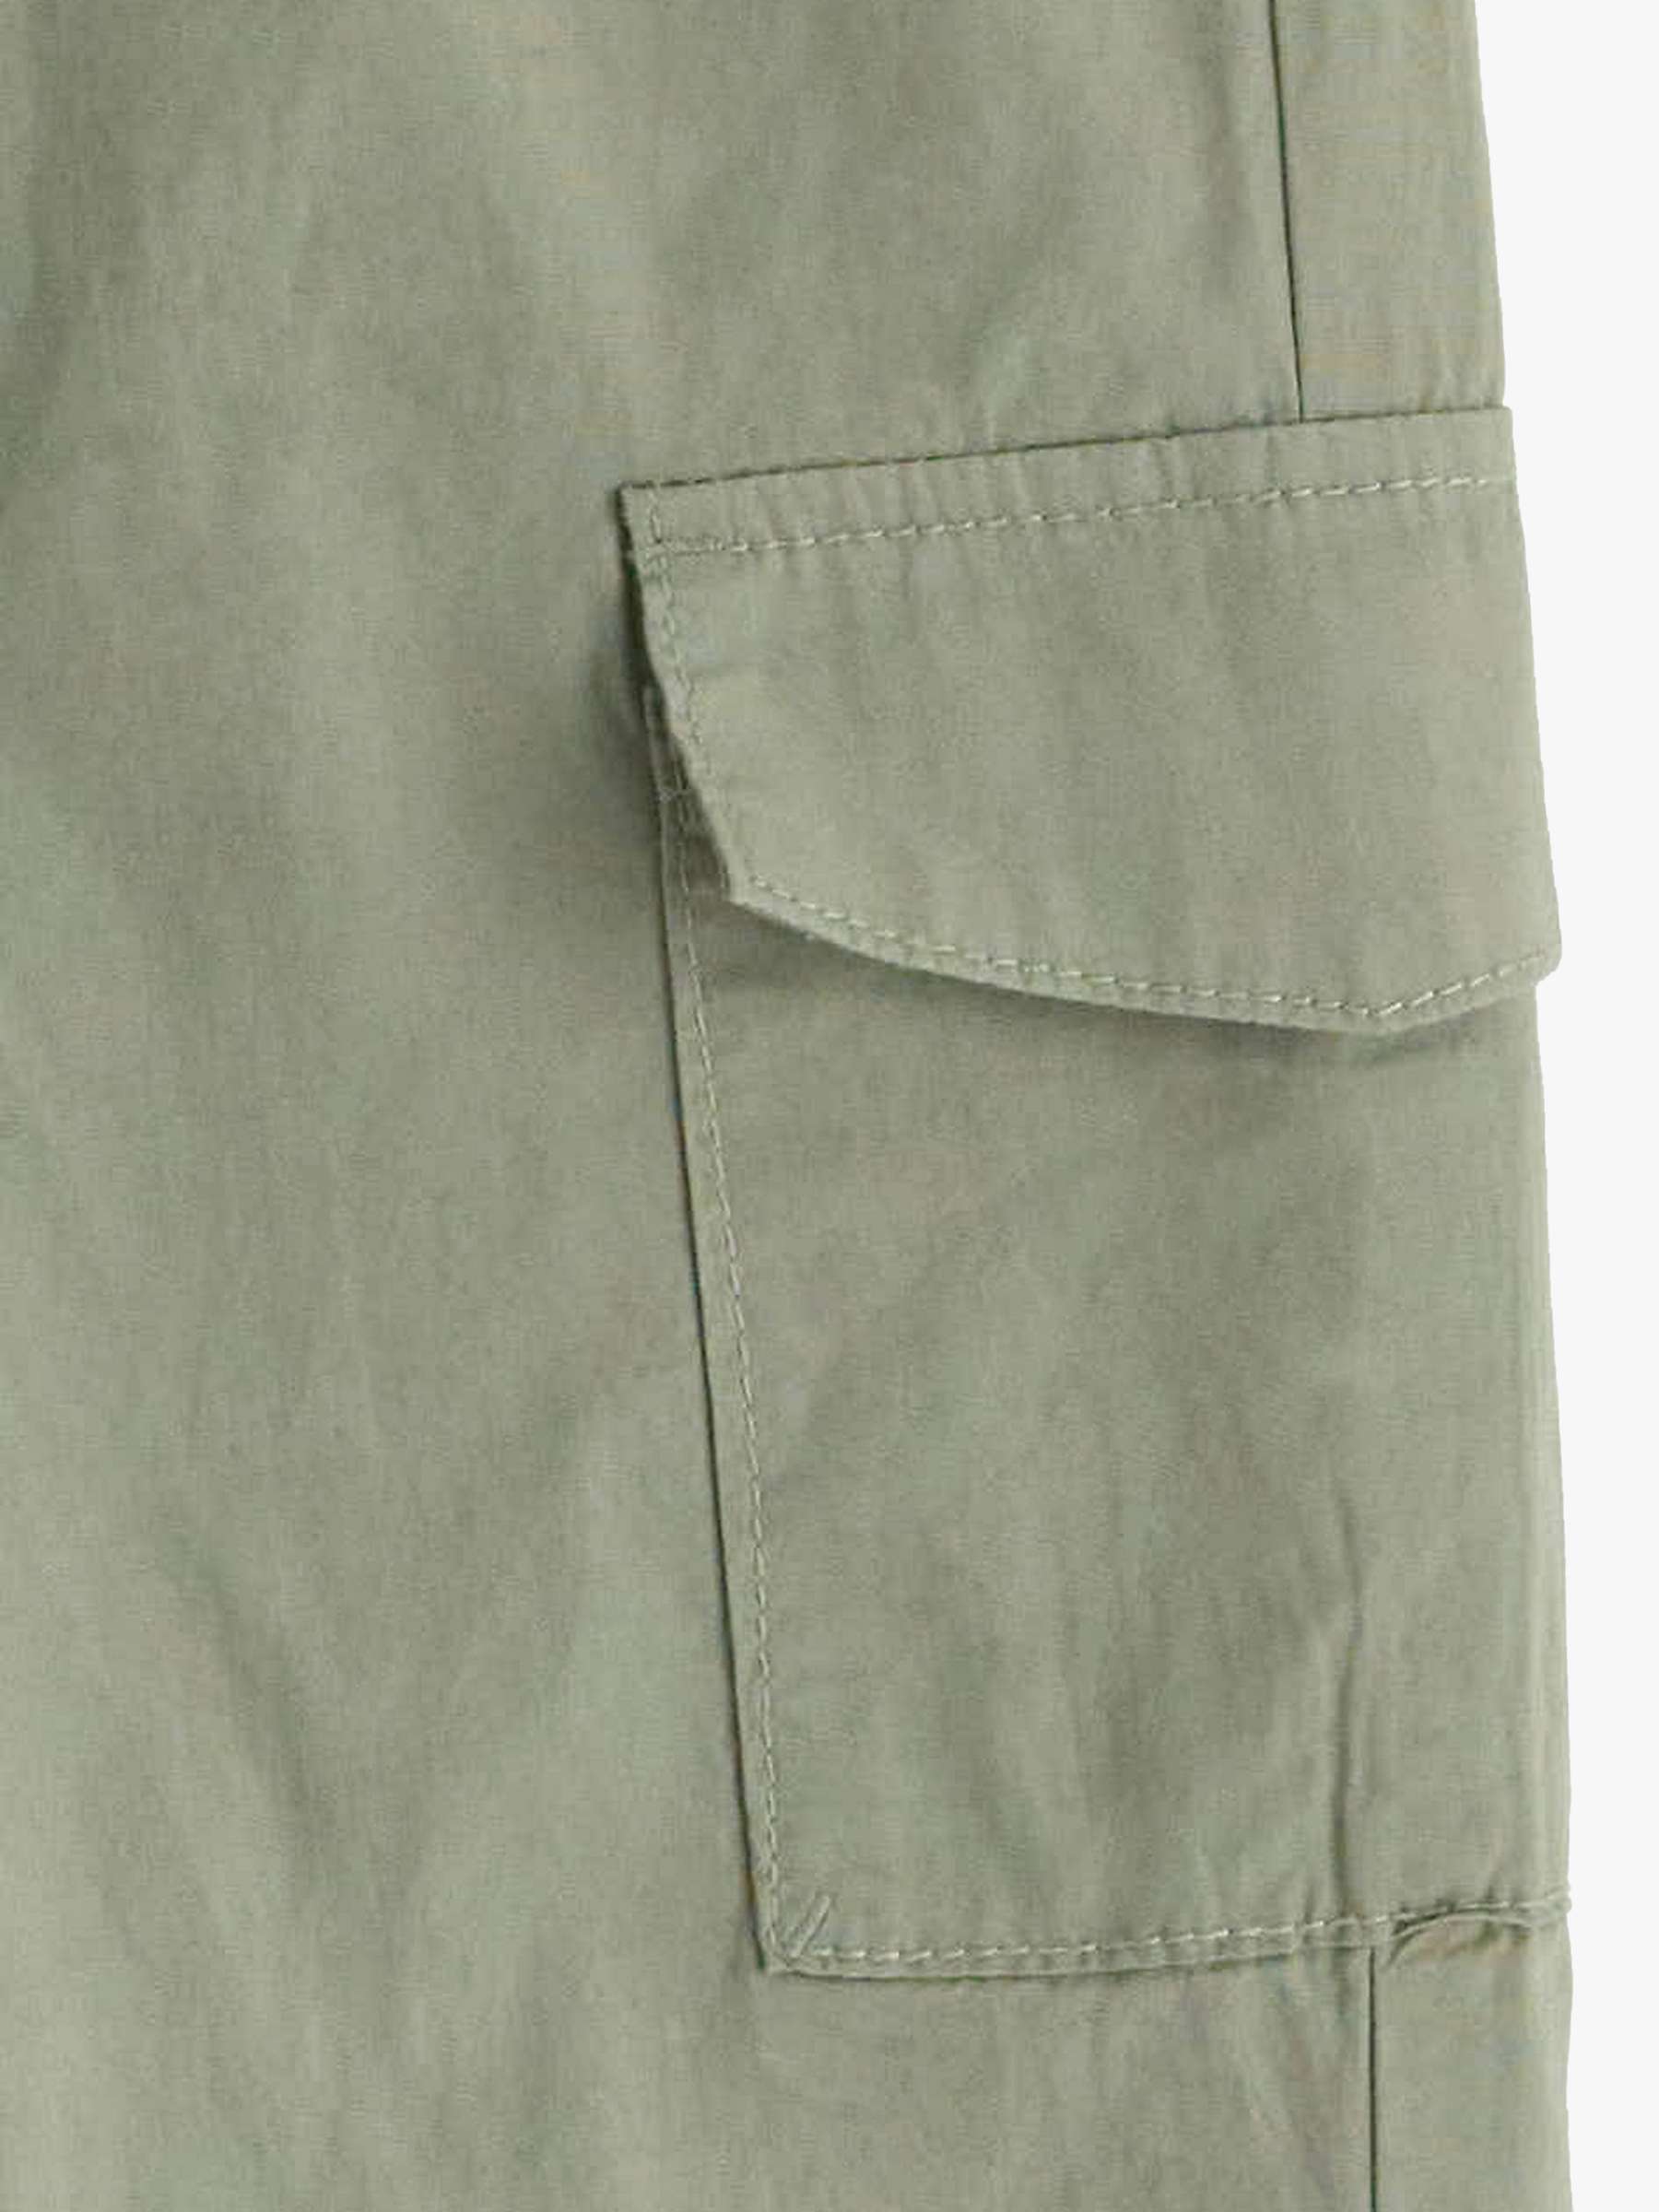 Buy Lindex Kids' Balloon Leg Cargo Trousers, Dusty Green Online at johnlewis.com